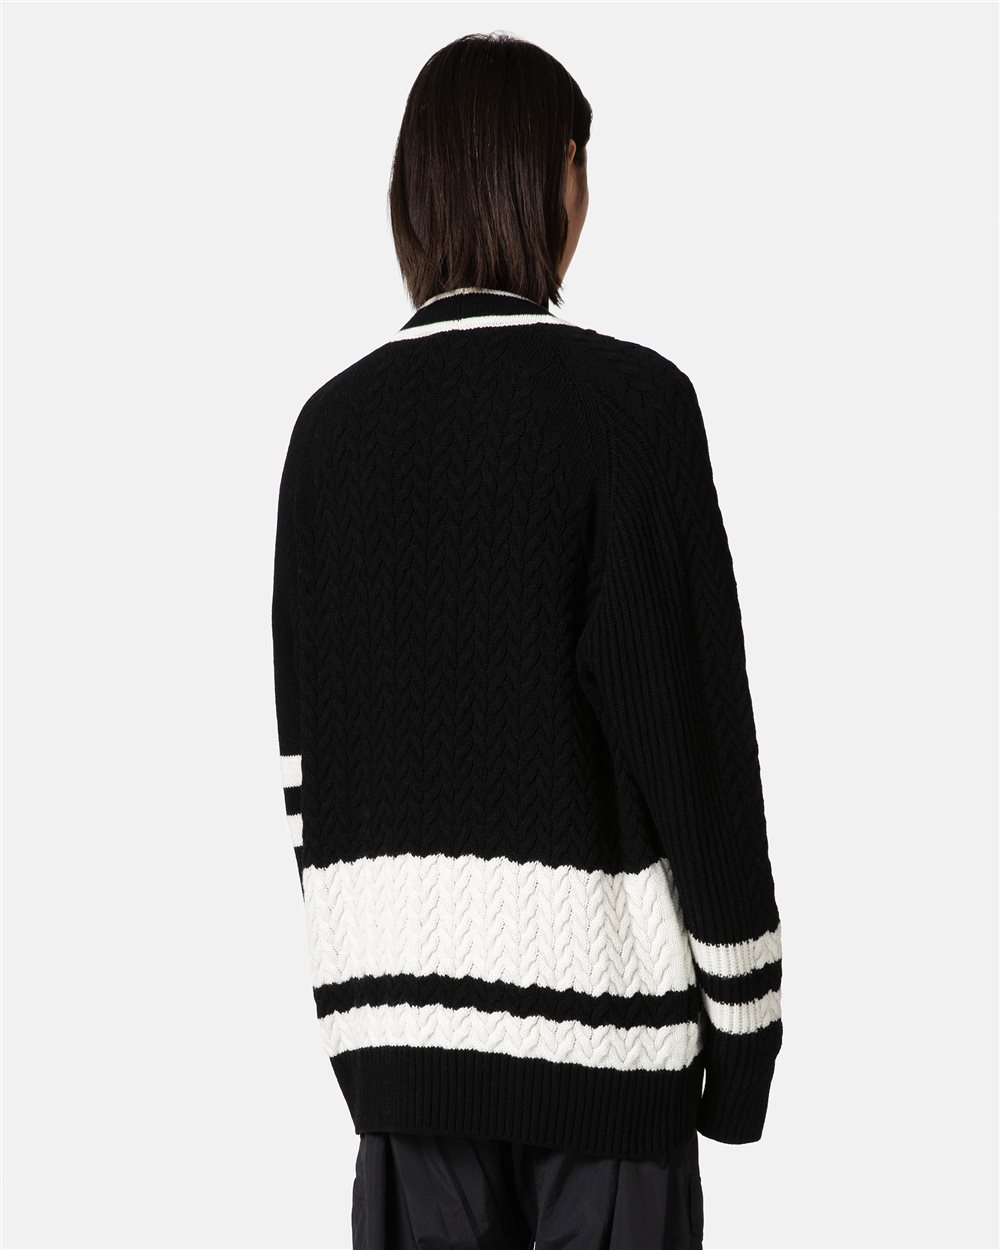 Black cable knit cardigan - Iceberg - Official Website